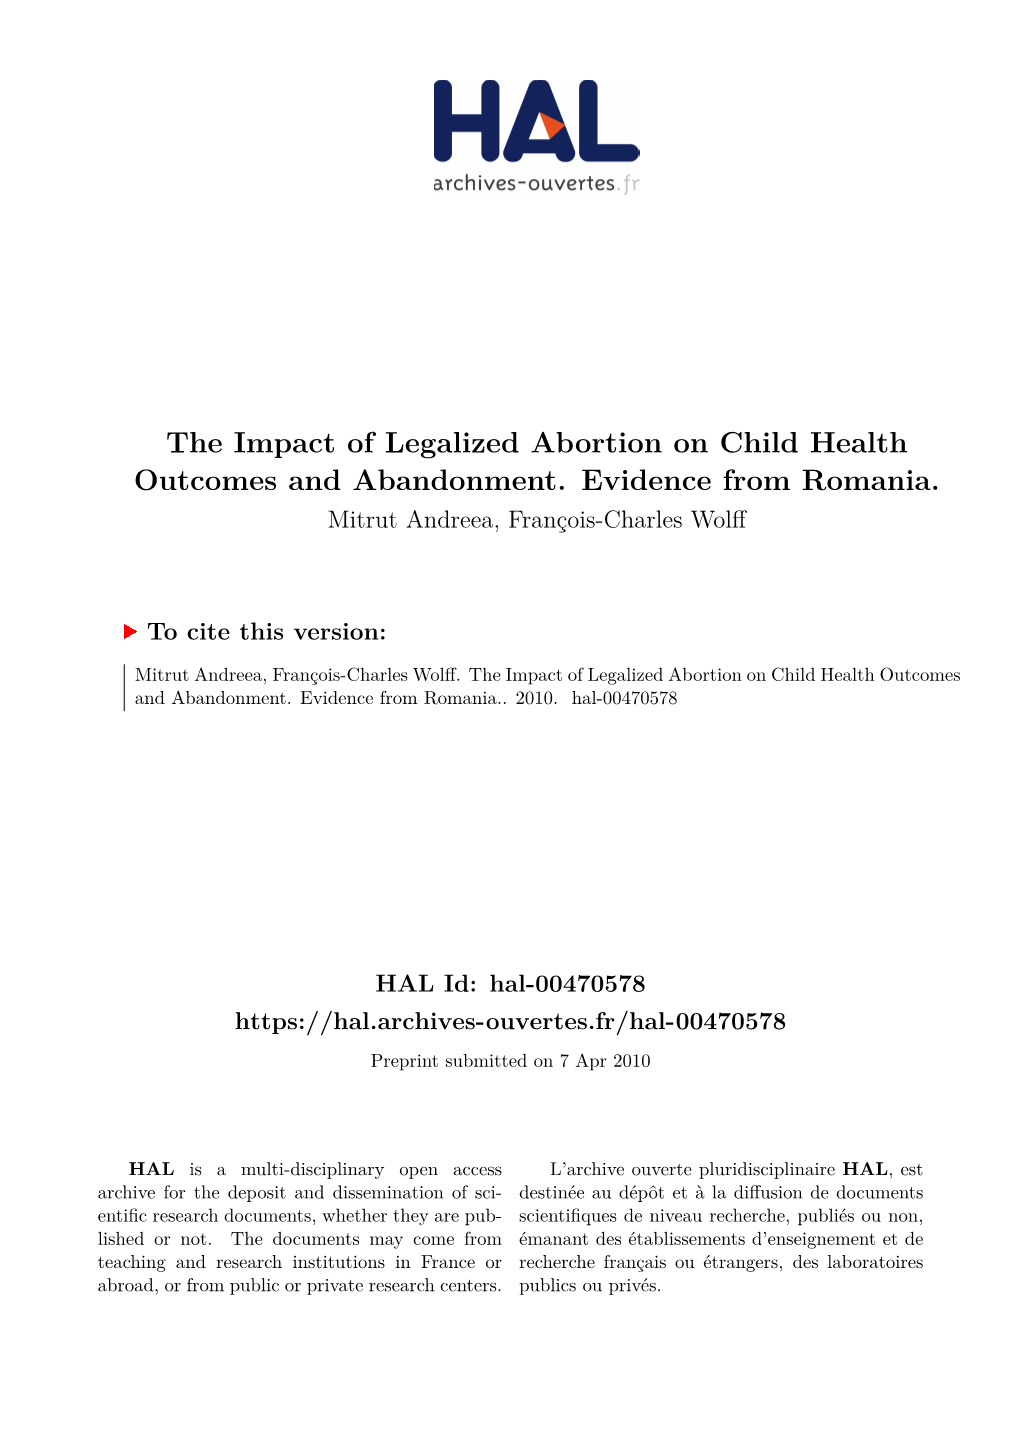 The Impact of Legalized Abortion on Child Health Outcomes and Abandonment